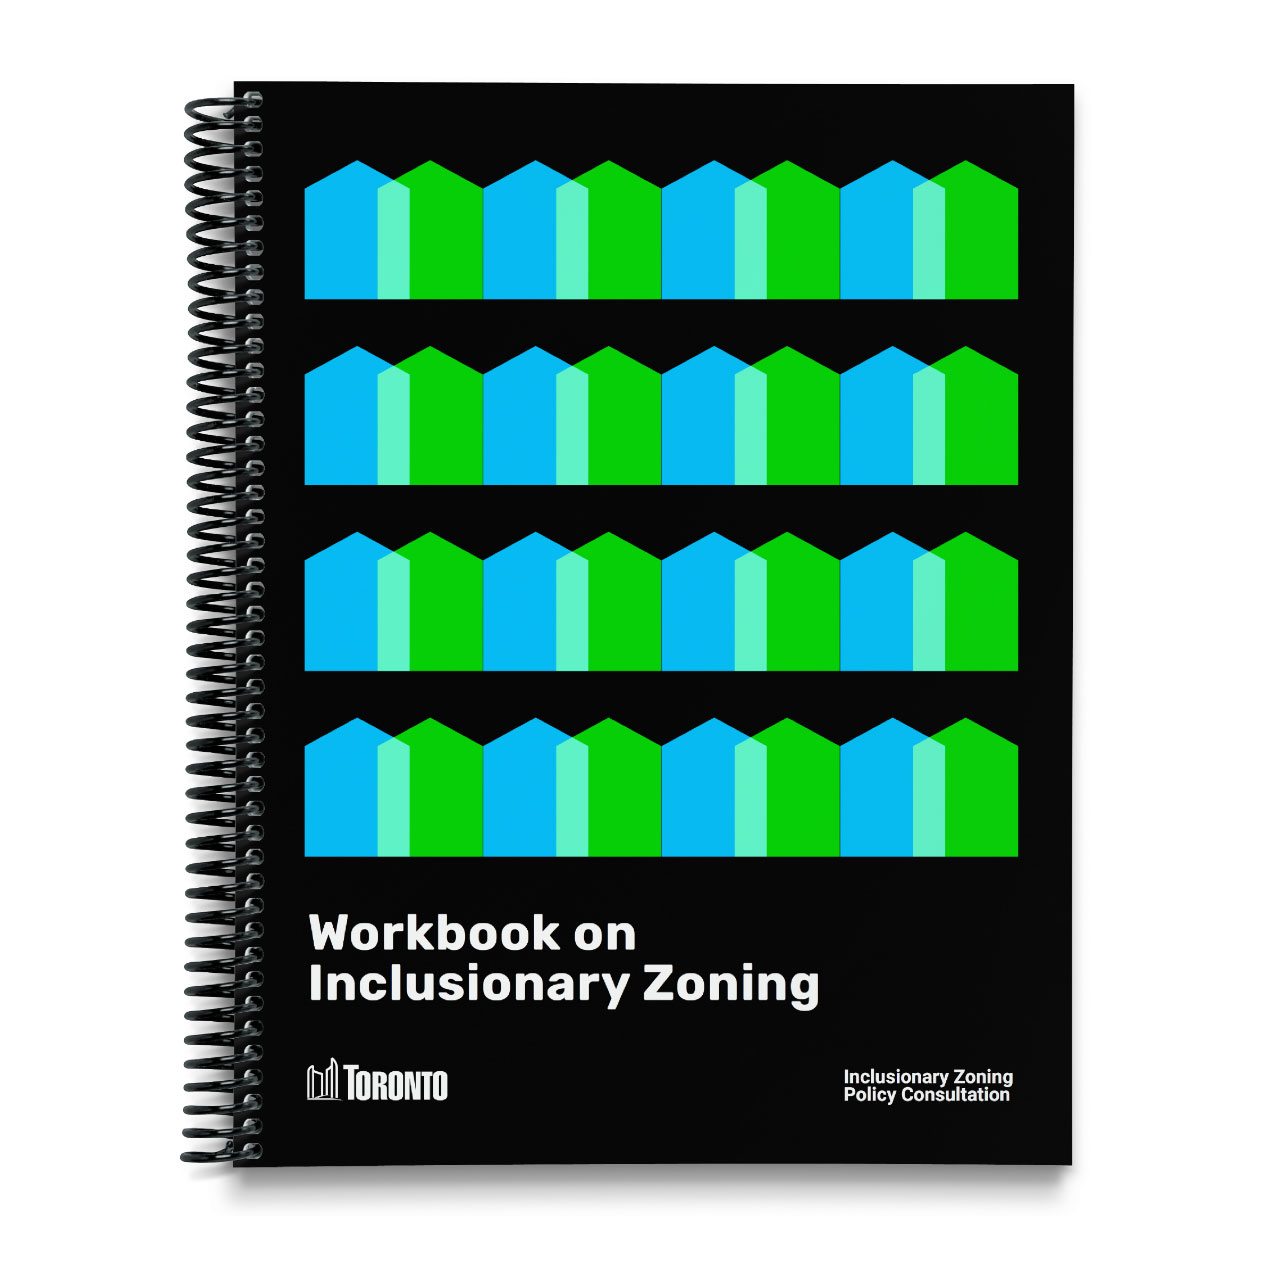 A black notebook with blue and green graphic pattern in the shape of houses and a 'workbook on inclusionary zoning' title